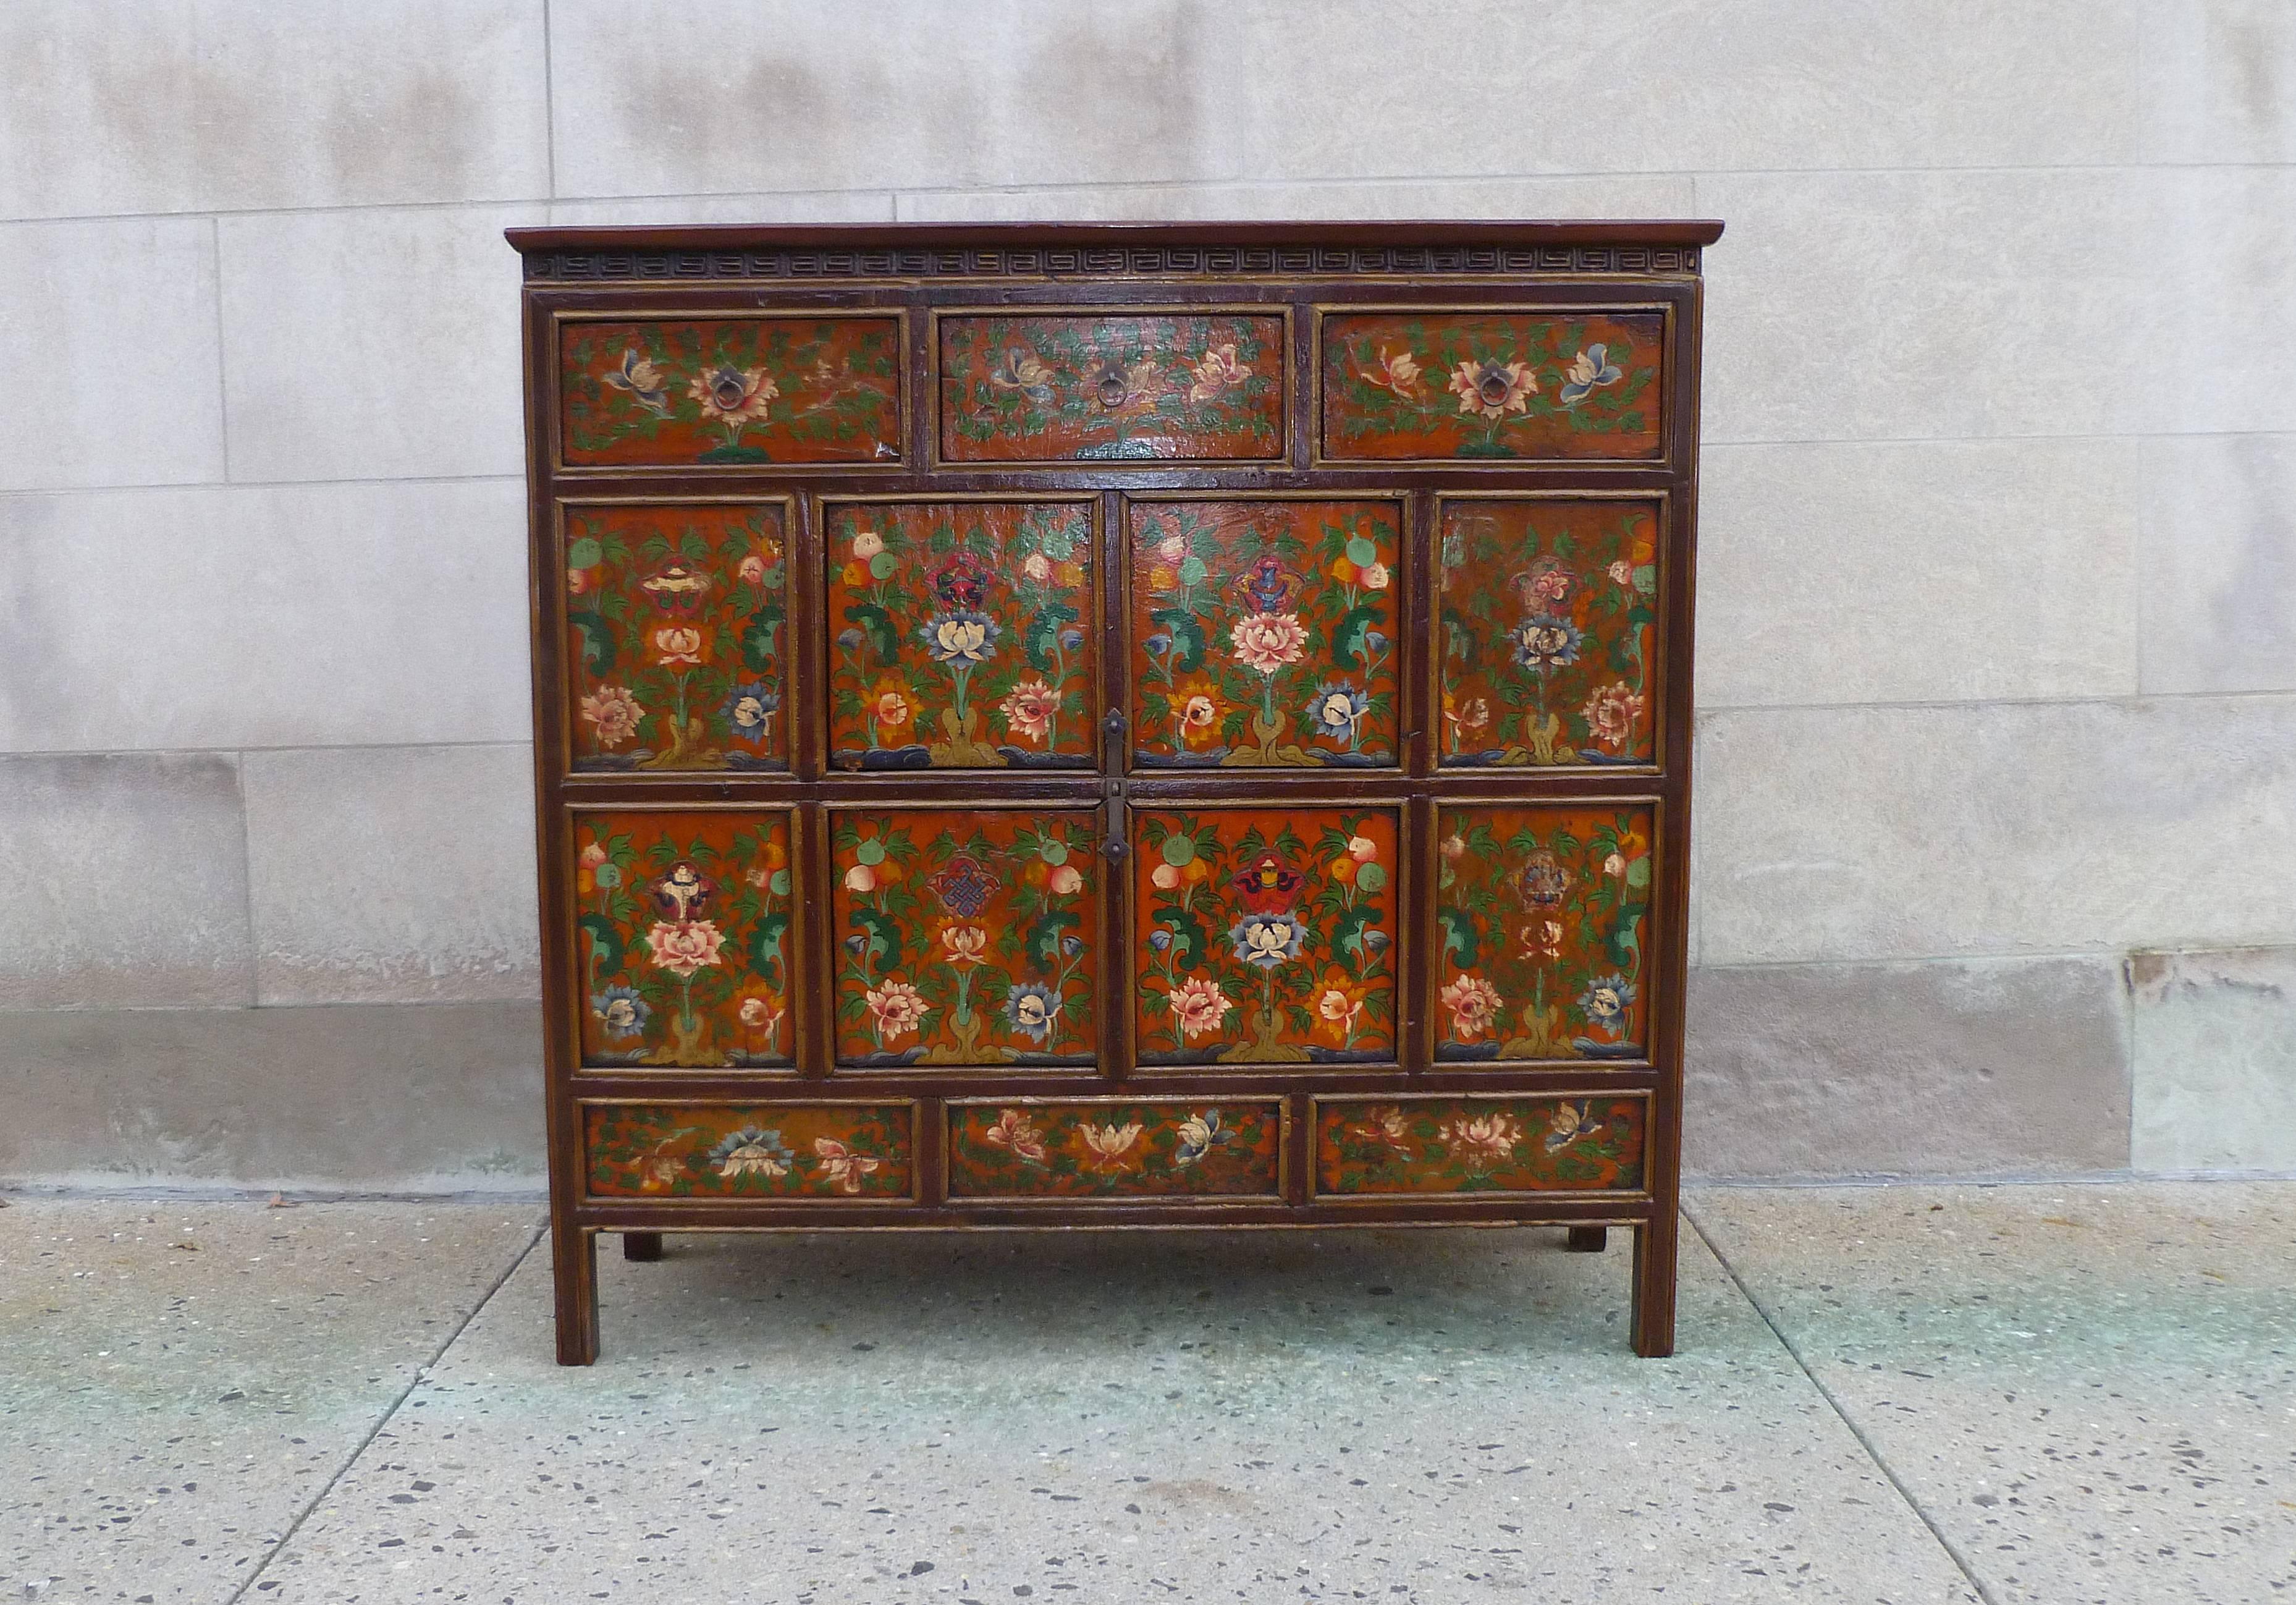 Tibetan chest with beautiful hand-painted floral motif on the front side, two pairs of doors, simple form, elegant colors.